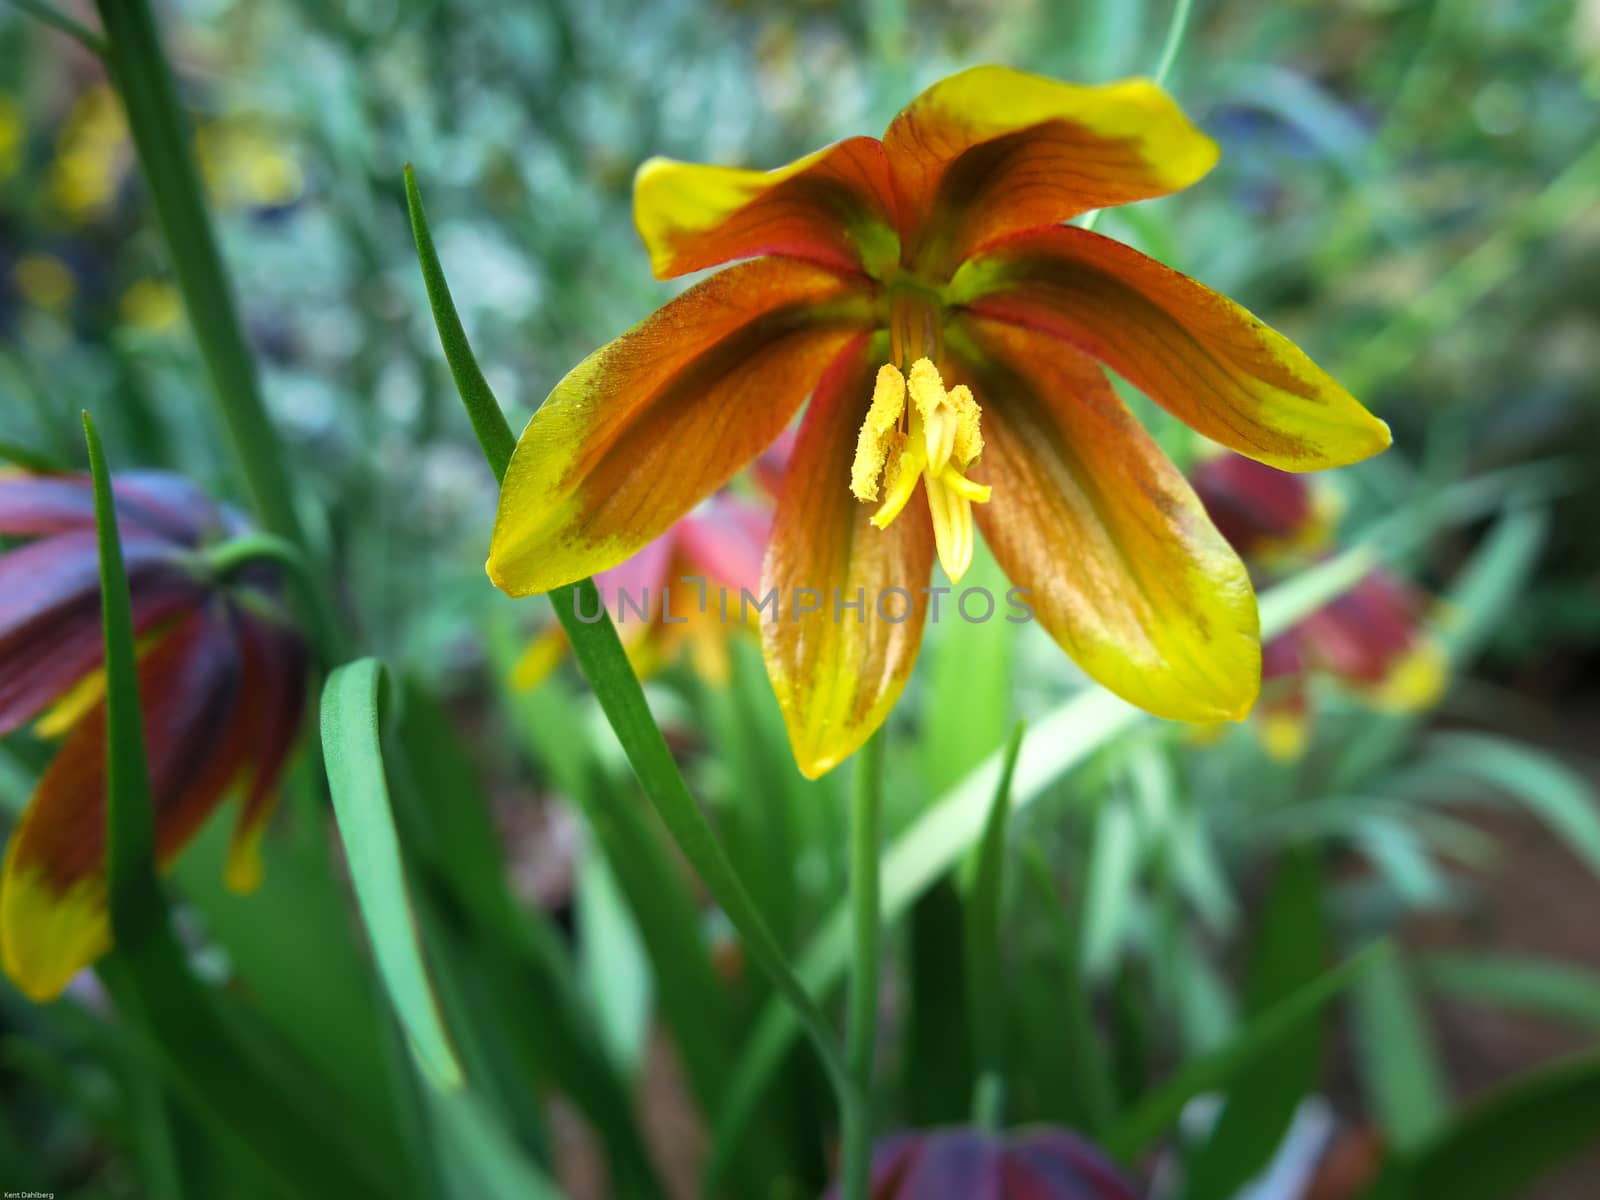 one very beutiful flower from Iran the name is Fritillaria reuteri